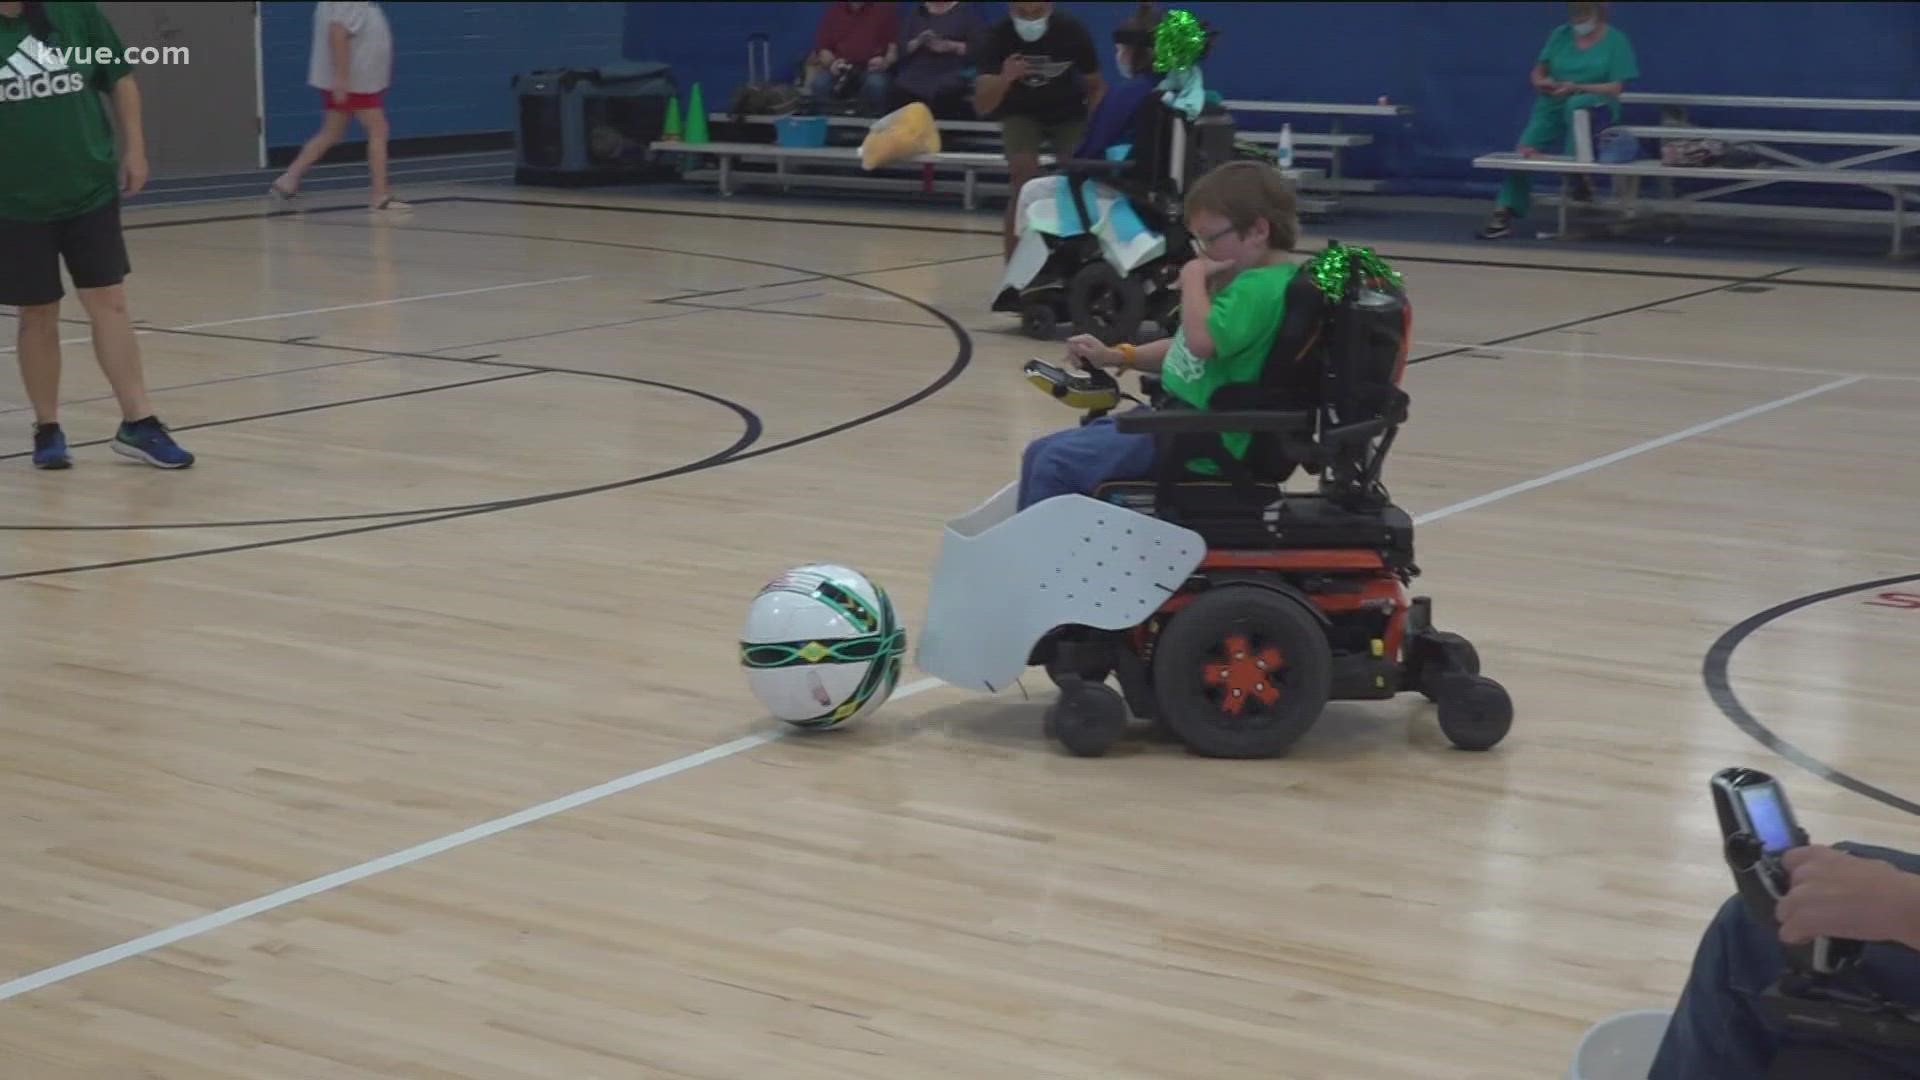 Round Rock is home to one of the newest and most inspiring teams in town – a group called The Green Machines. They're the only power soccer team in Central Texas.